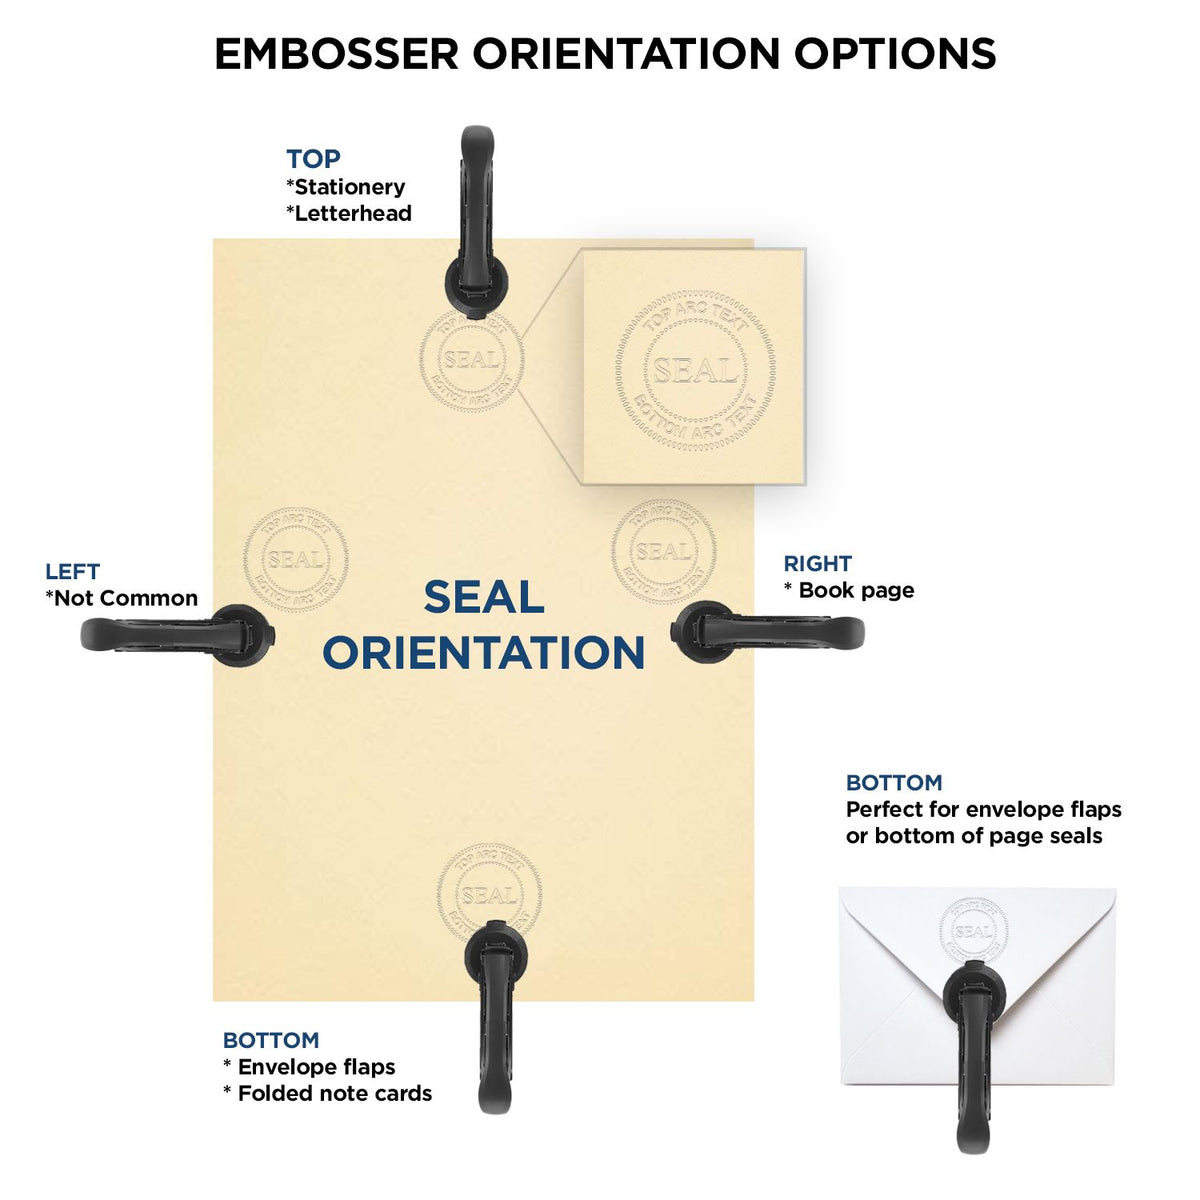 An infographic for the State of Ohio Extended Long Reach Geologist Seal showing embosser orientation, this is showing examples of a top, bottom, right and left insert.